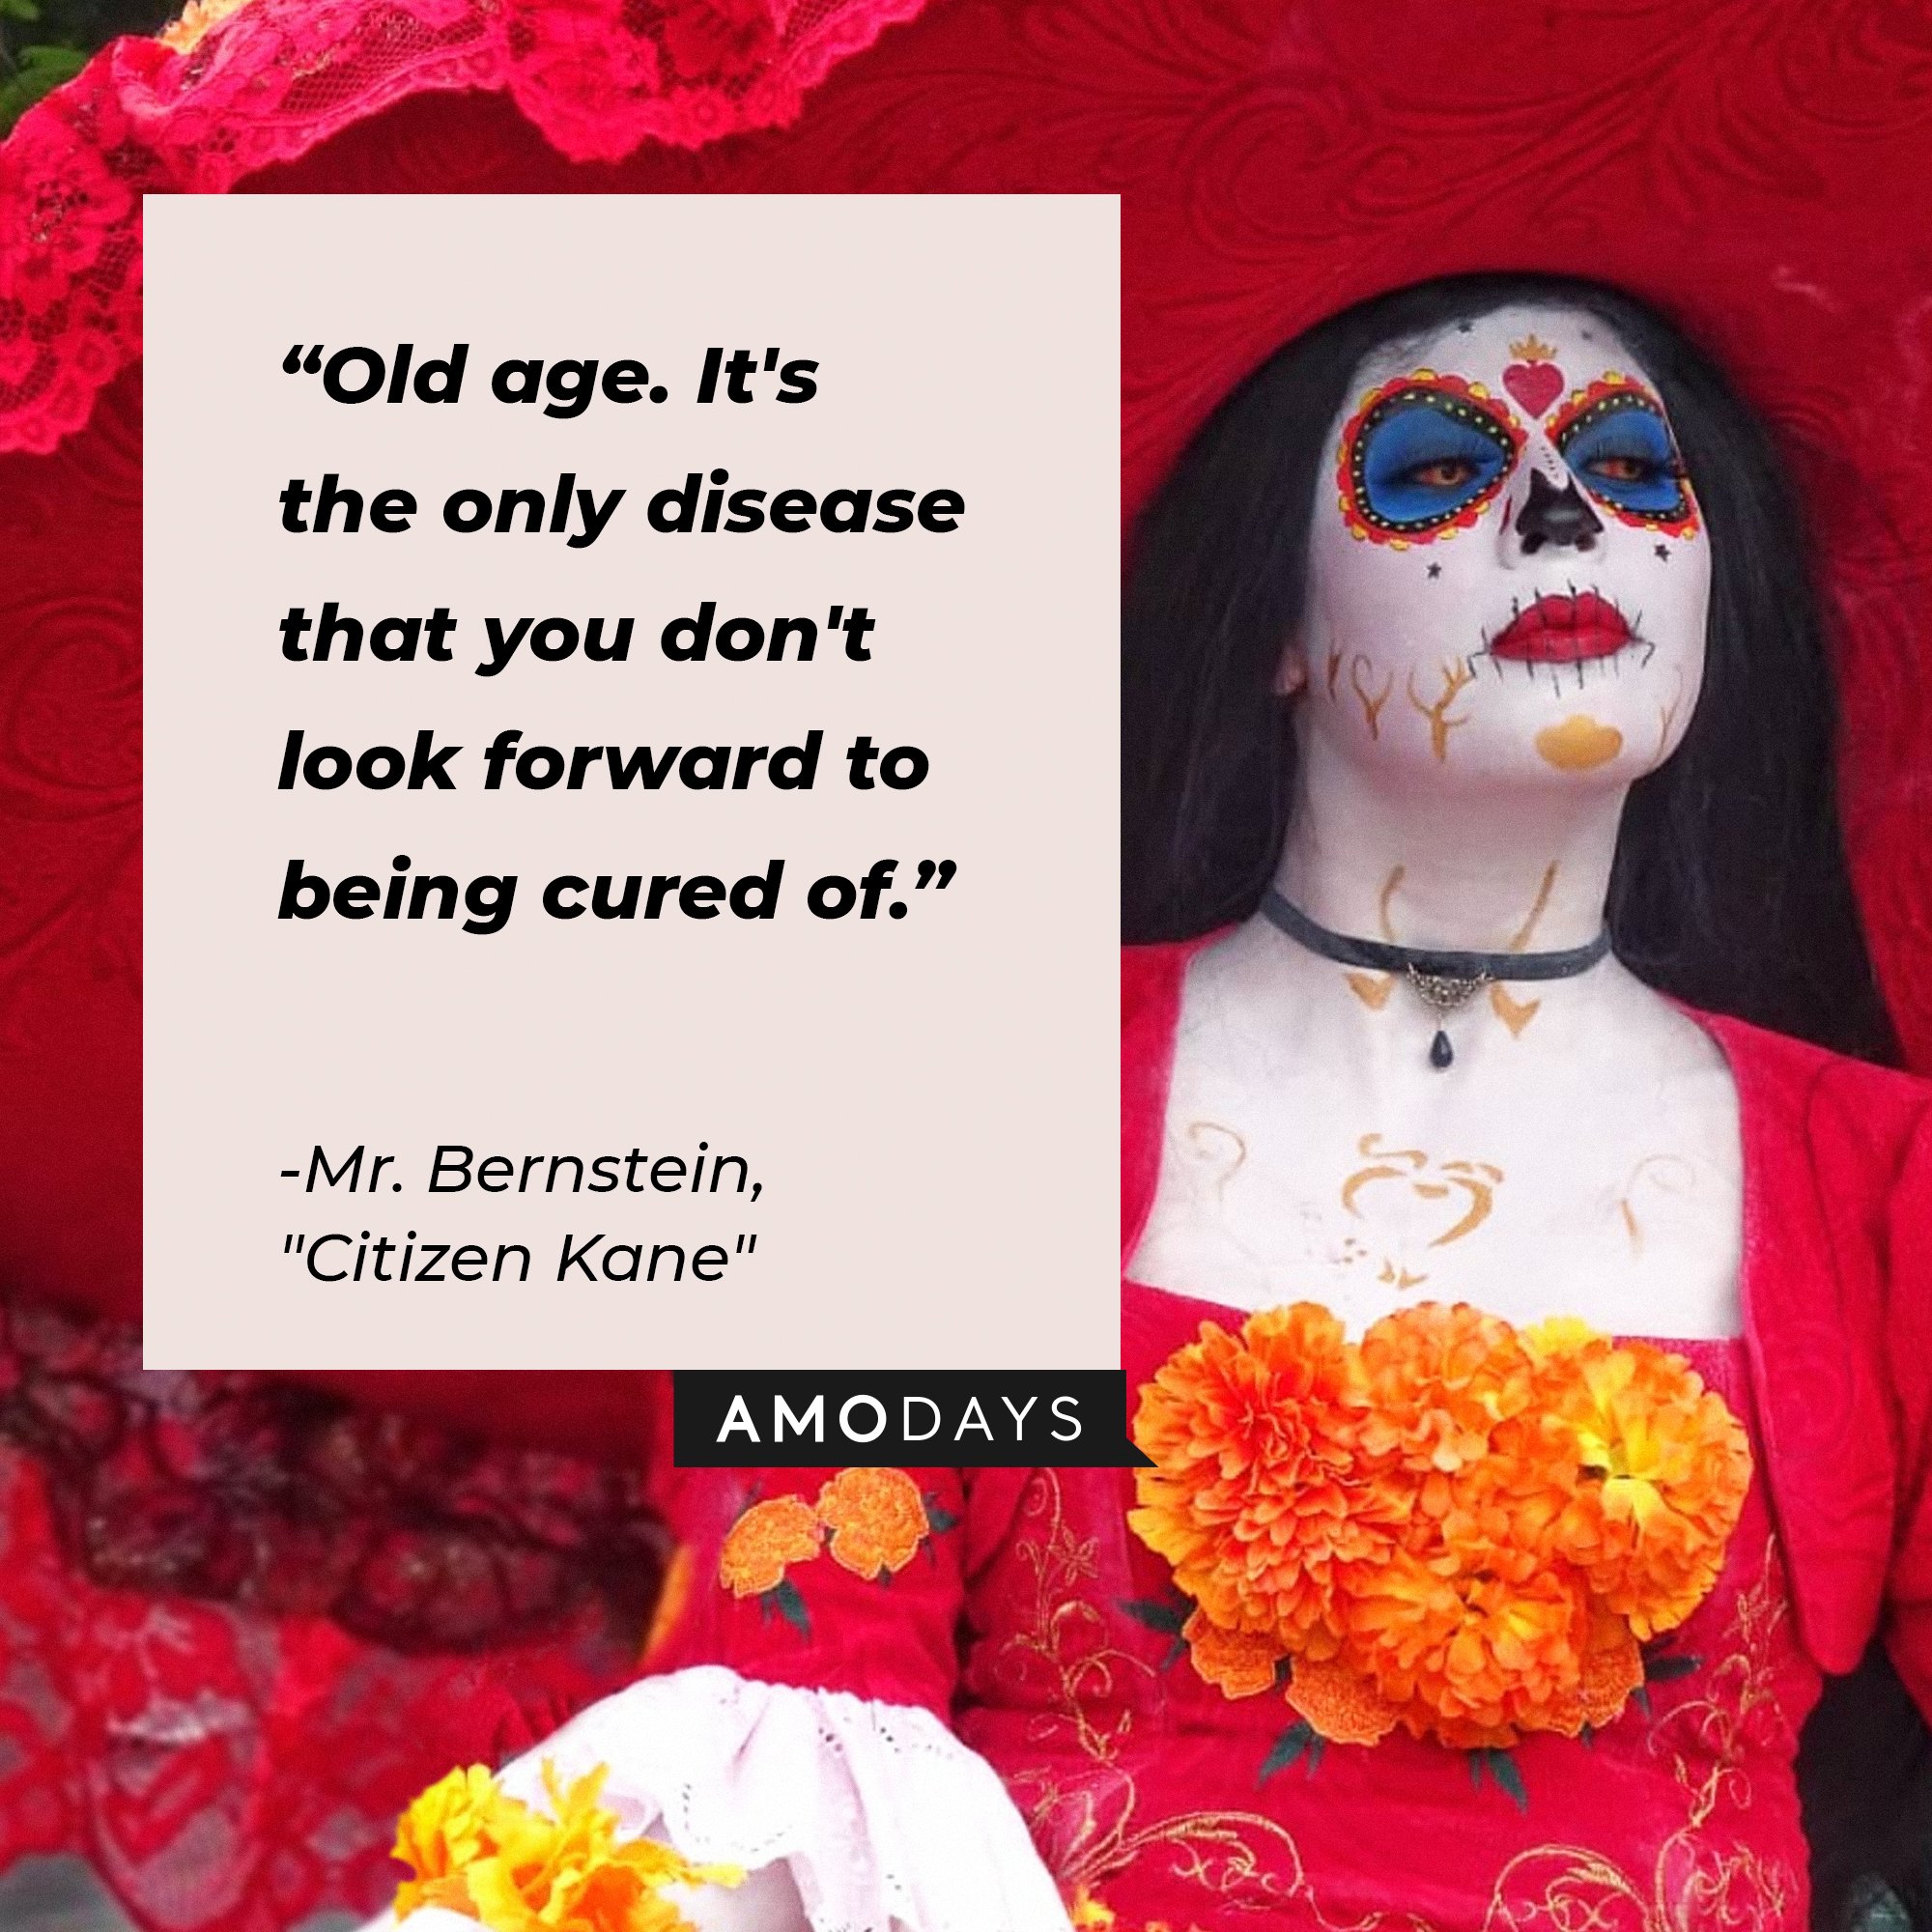 Mr. Bernstein’s quote from “Citizen Kane”: "Old age. It's the only disease that you don't look forward to being cured of."  | Image: AmoDays   